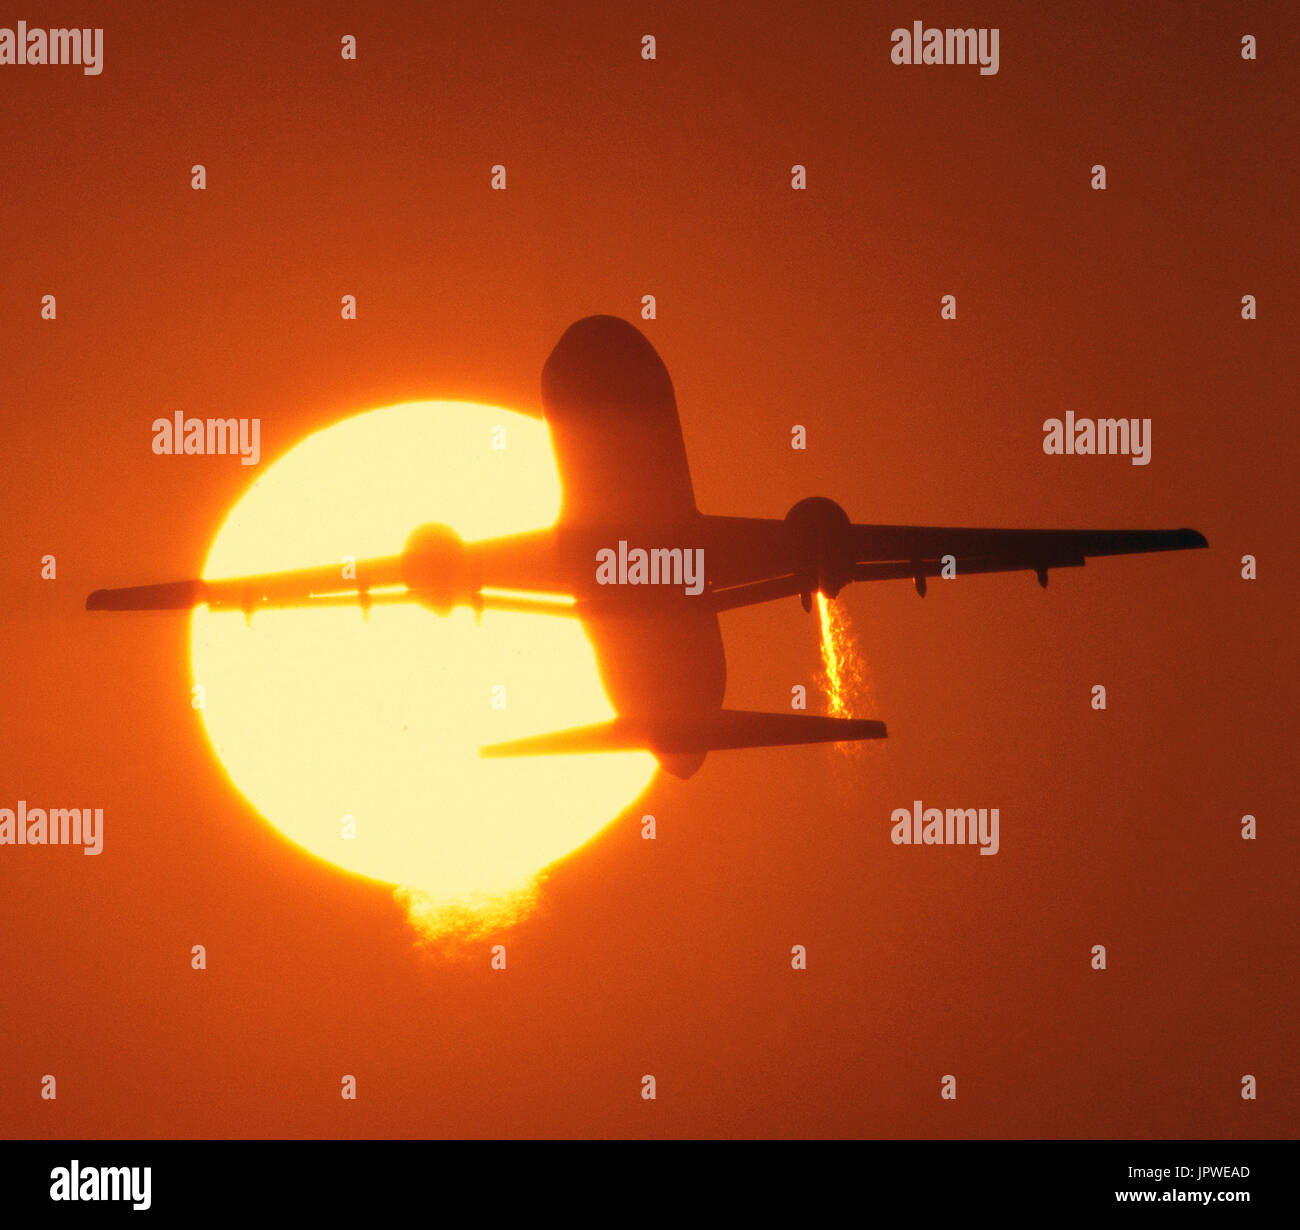 Airbus A320 climbing enroute through the sunset with jet-exhaust visible Stock Photo